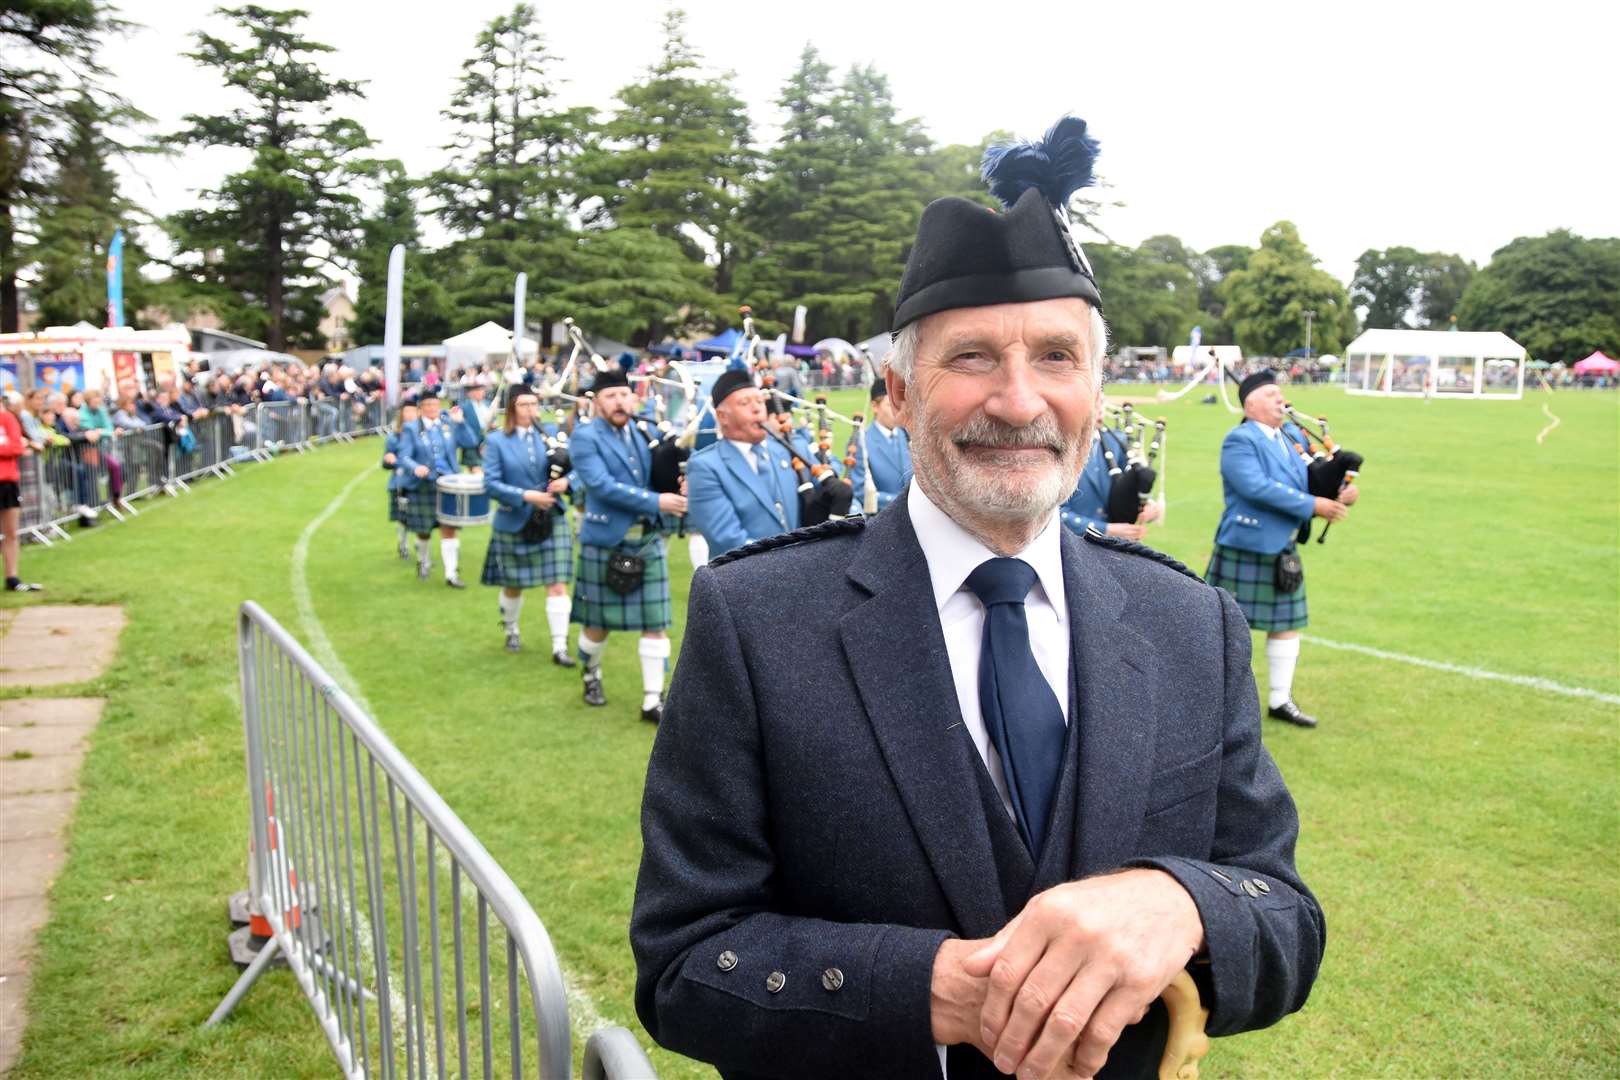 Cheiftain John Channon, MBE, Chairman of the Forres & District Pipe Band, at the Forres Highland Games 2019. Picture: Becky Saunderson